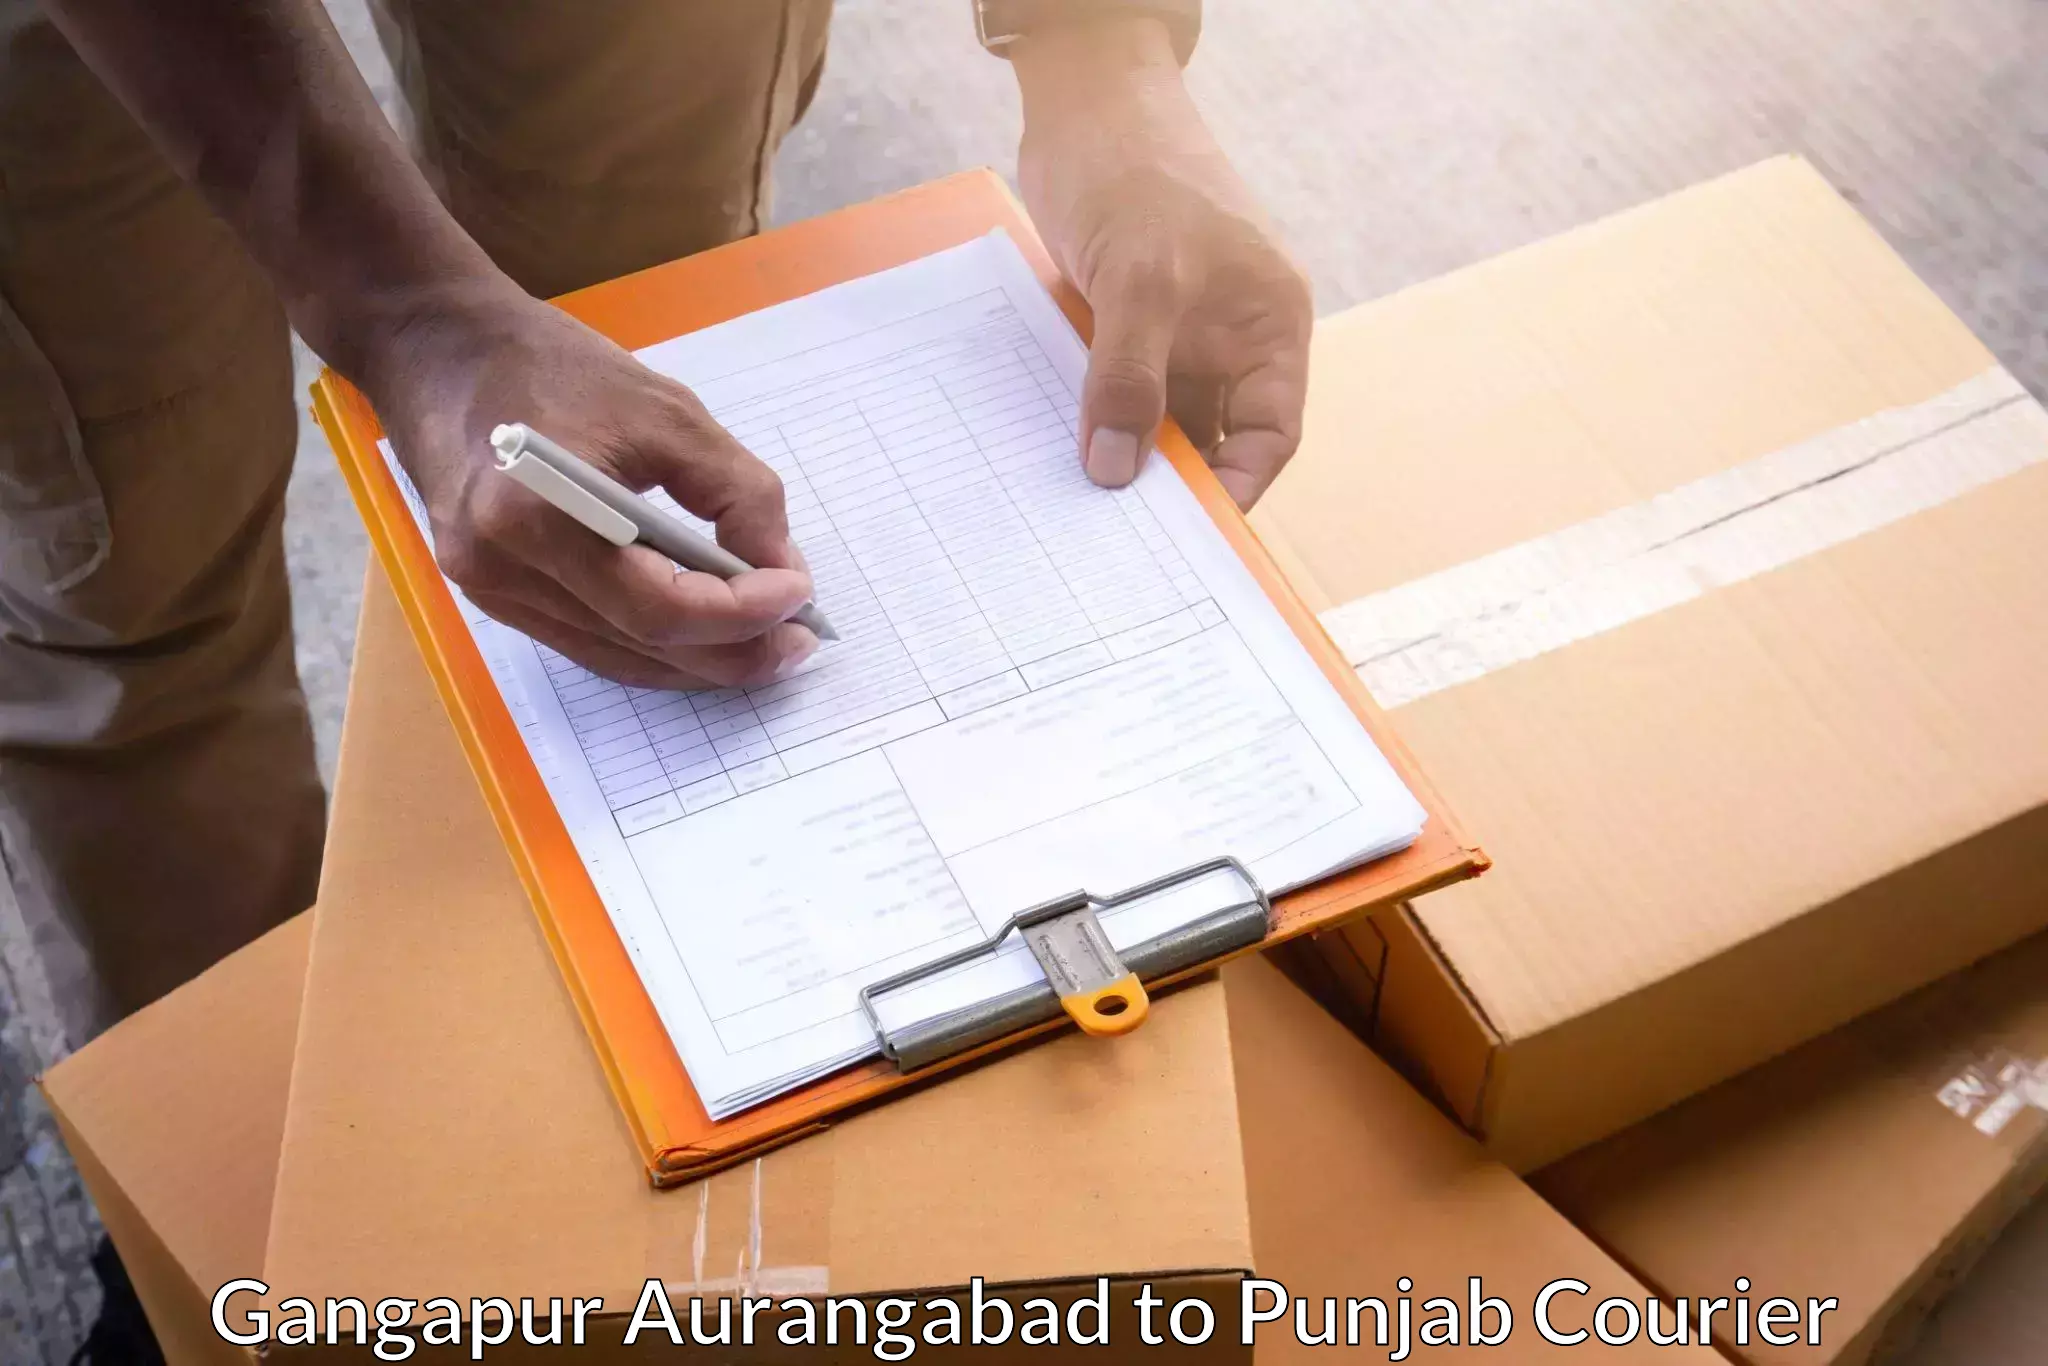 End-to-end delivery in Gangapur Aurangabad to Malout